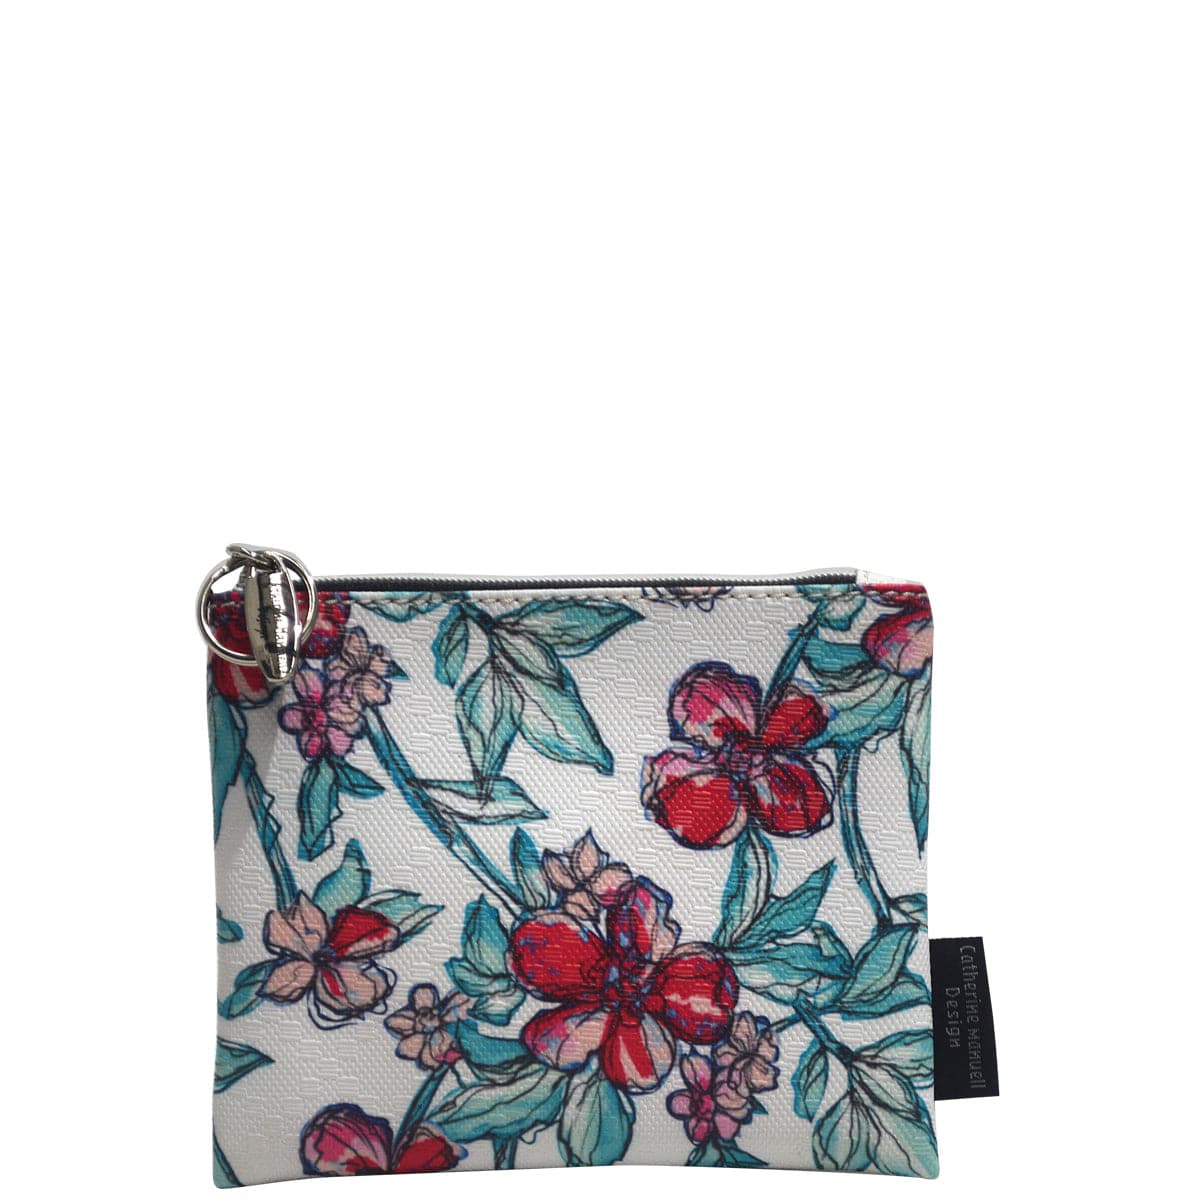 Everyday Purse - White Red Sketch Flower